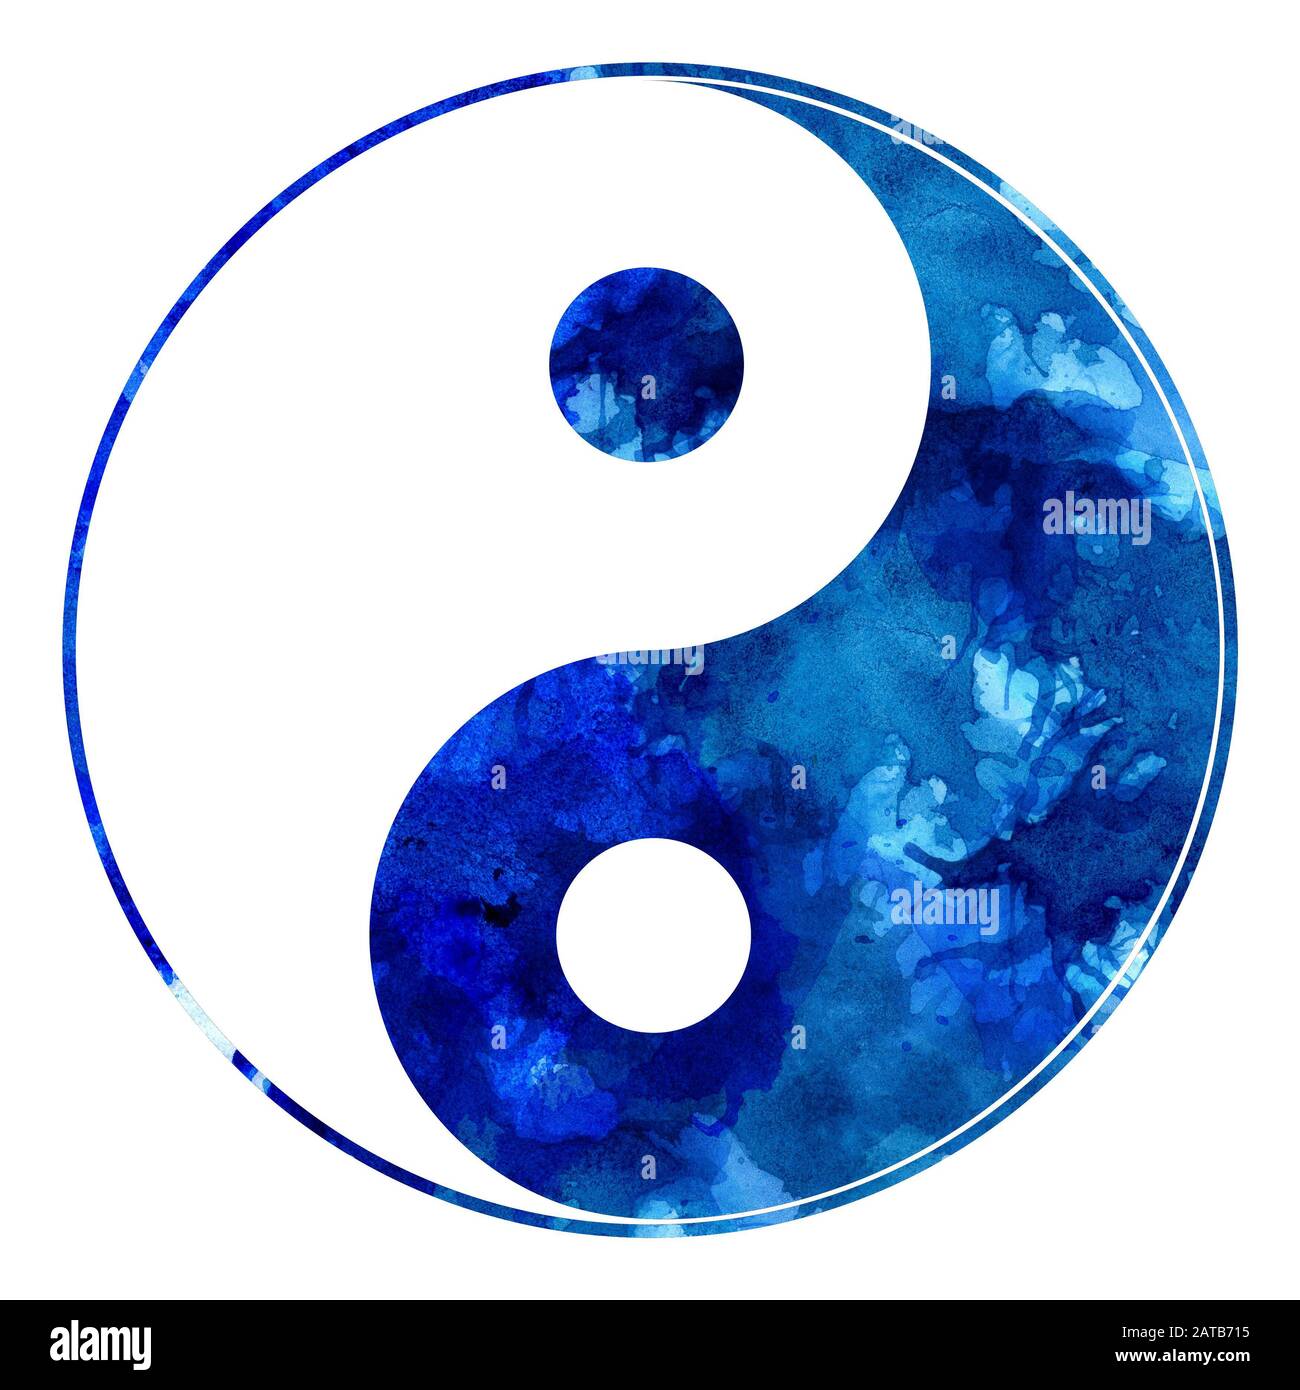 Digital illustration of yin yang sign made with blue watercolor splatters. Stock Photo